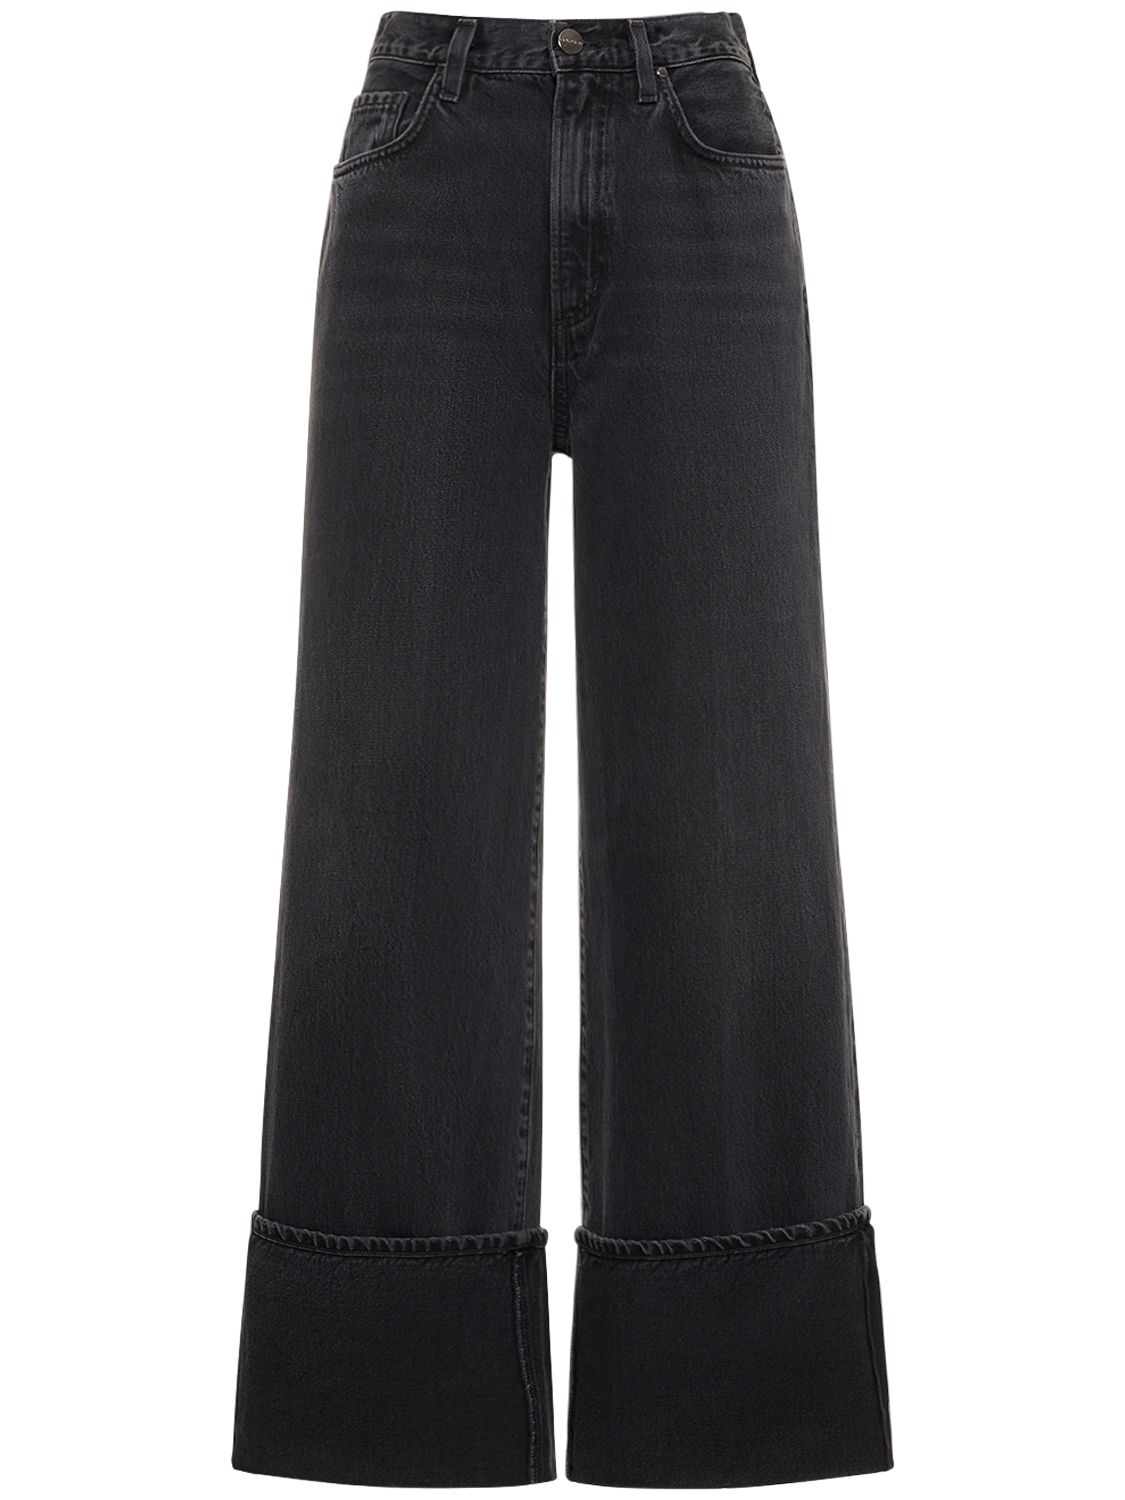 The Astley High Rise Wide Denim Jeans